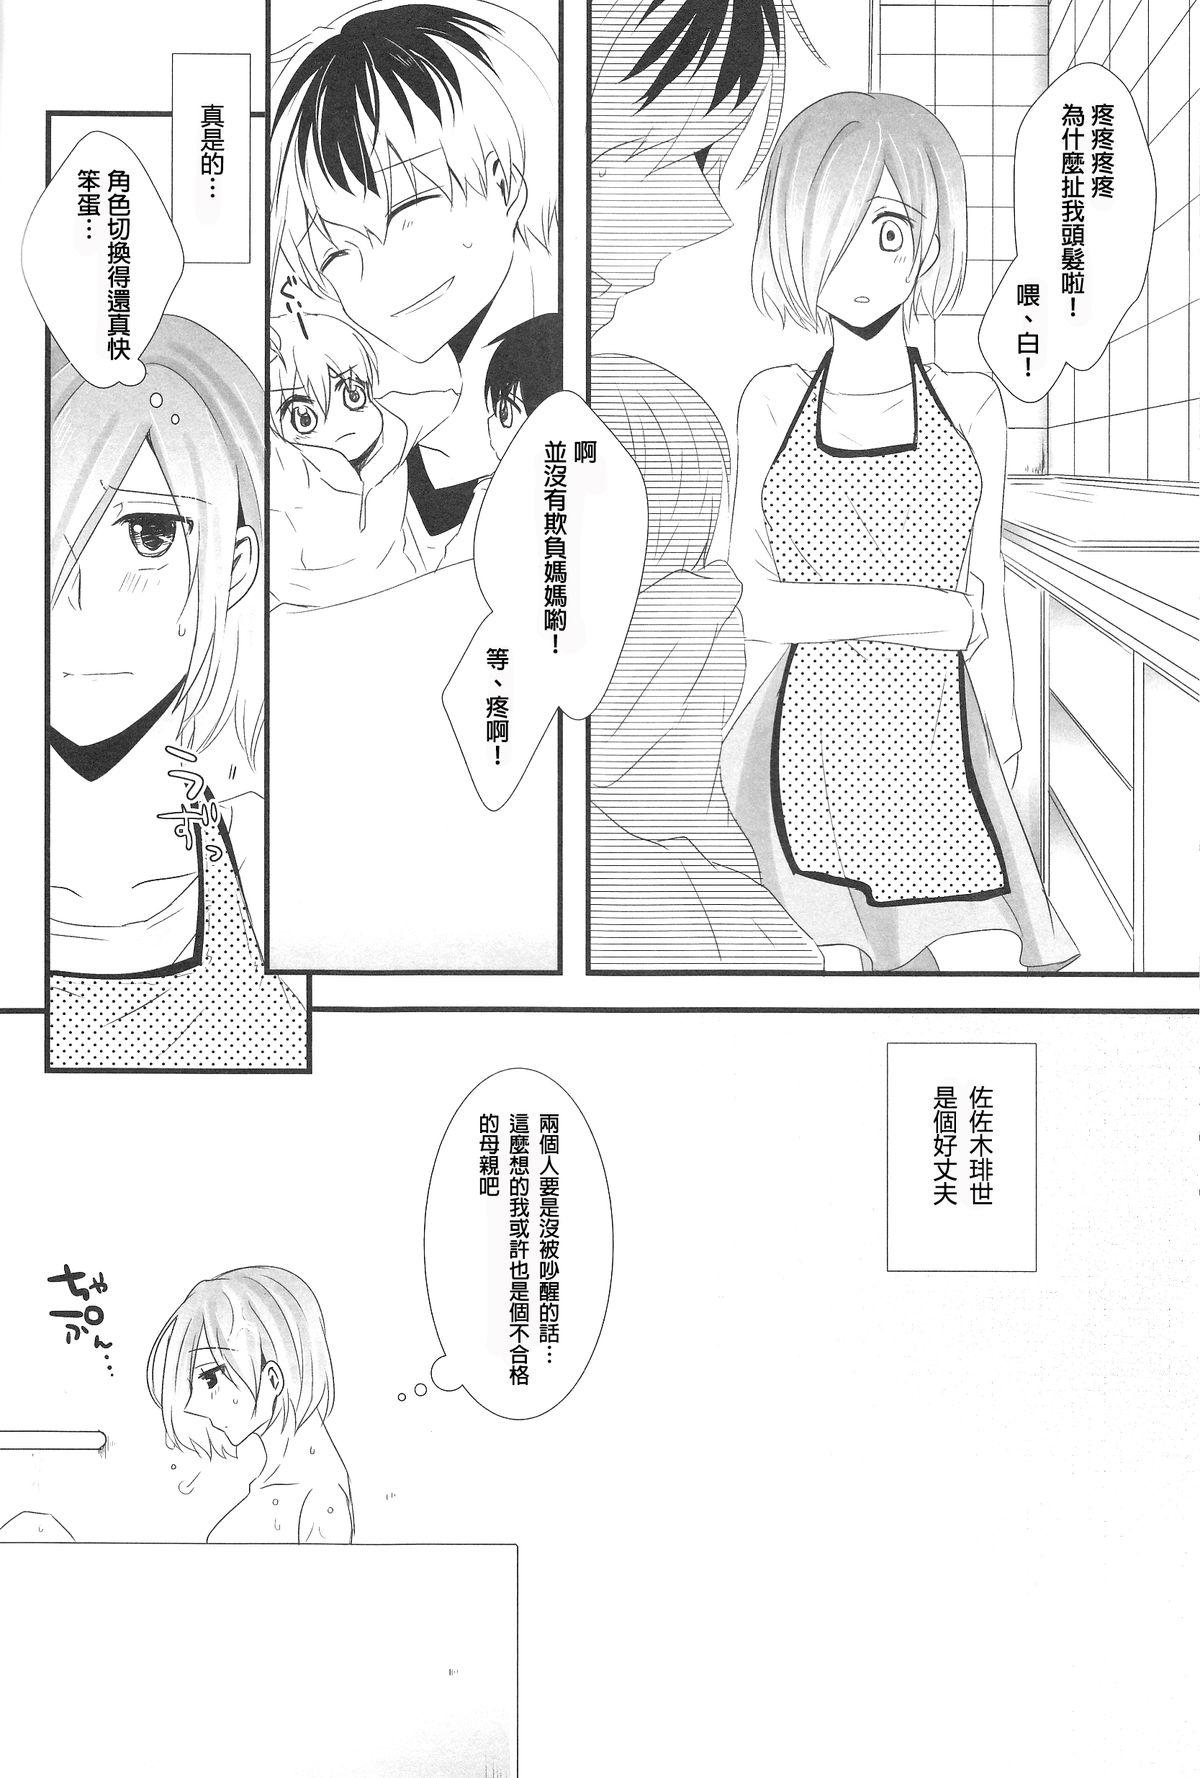 Sweet Kitaru Mirai no Himitsugoto - Secret Events of the Coming Future - Tokyo ghoul Sologirl - Page 21